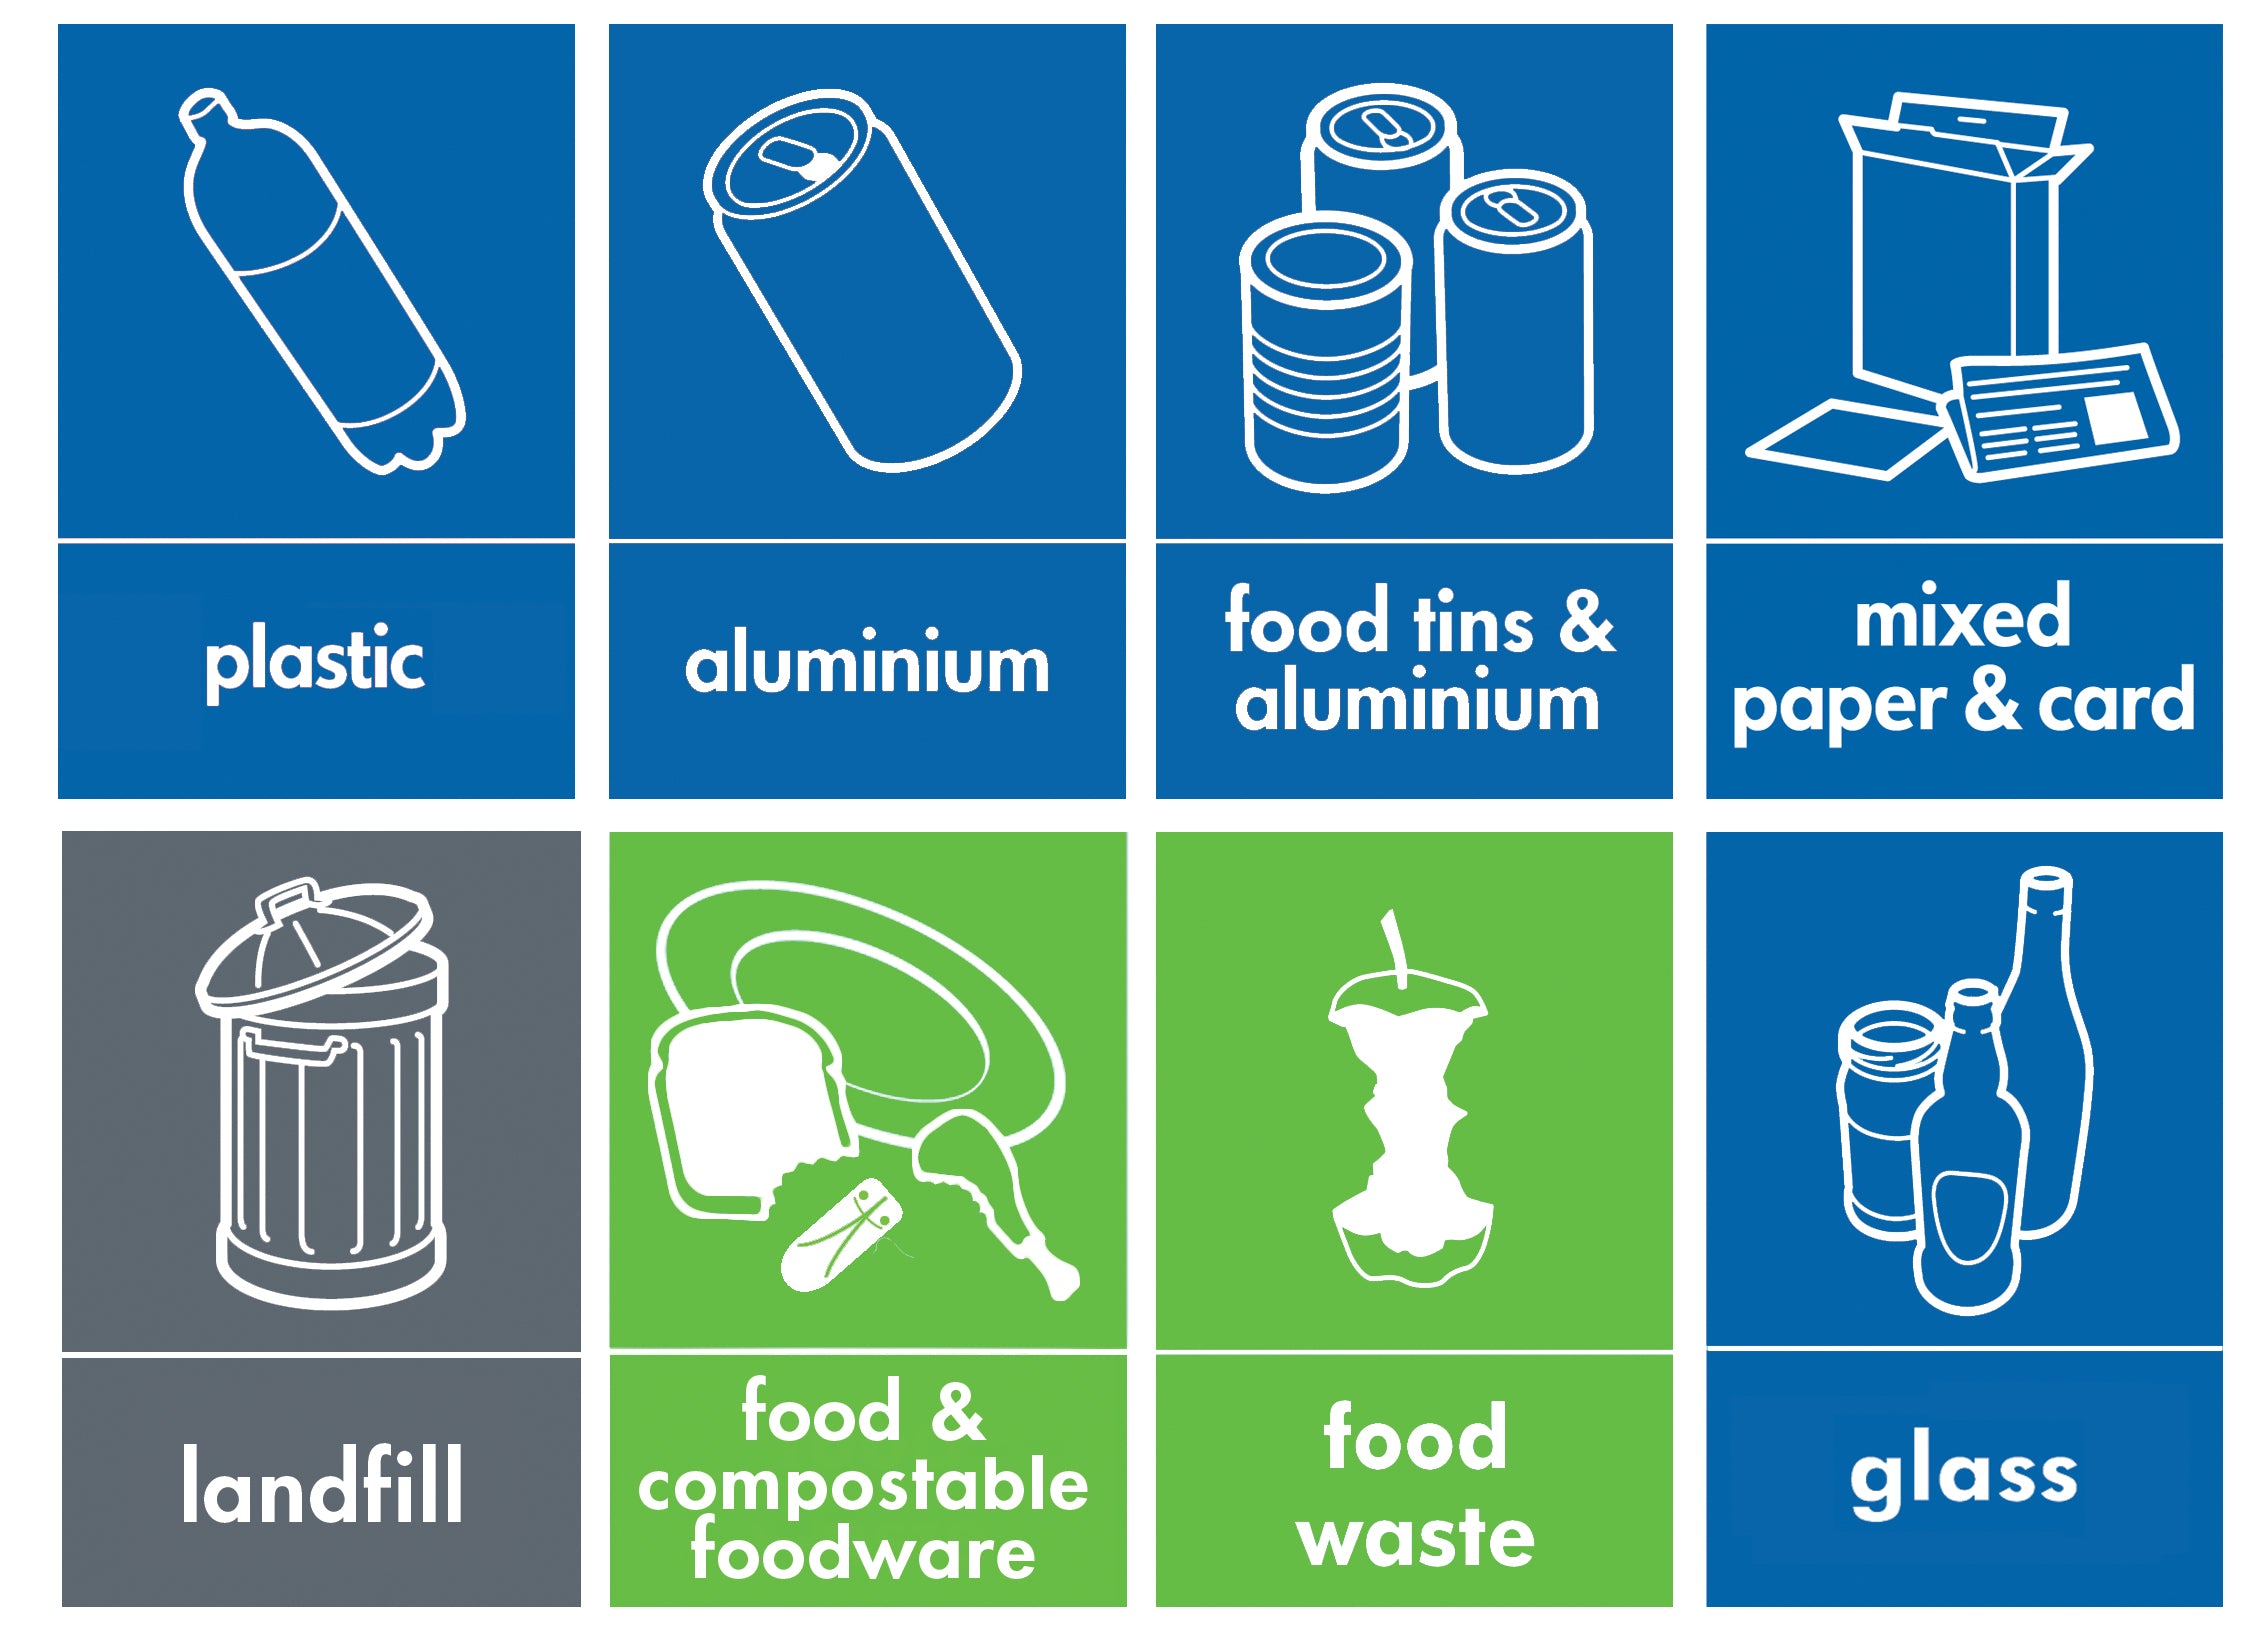 Print Your Own Recycling Signage For Your Deli Or Food Prep Kitchen Ecotensil